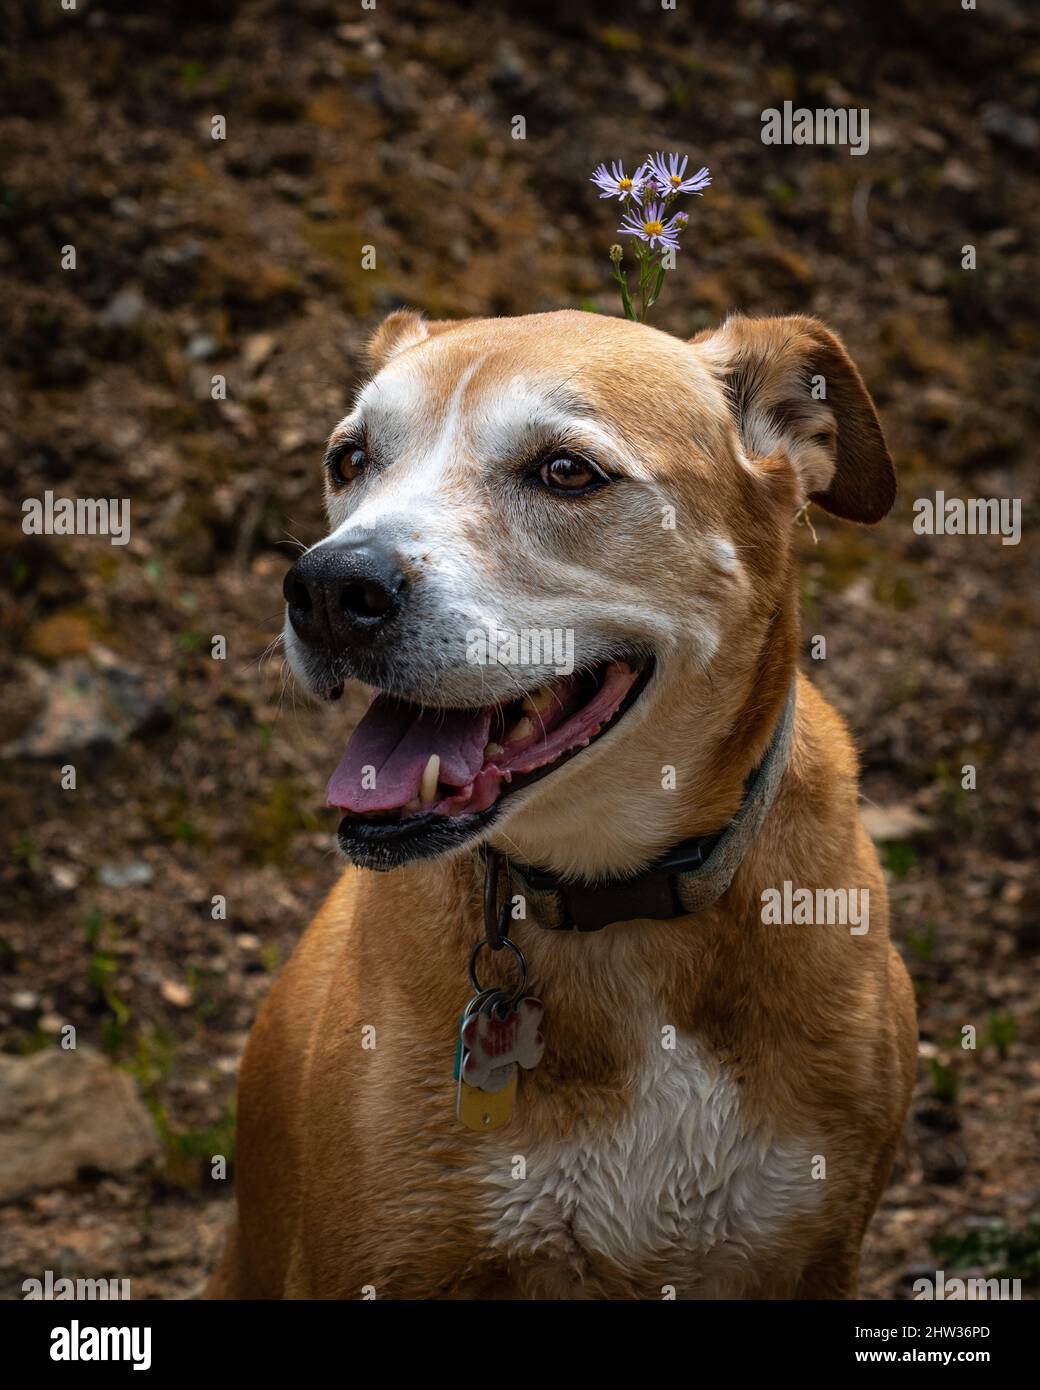 A happy dog with flowers in her hair Stock Photo